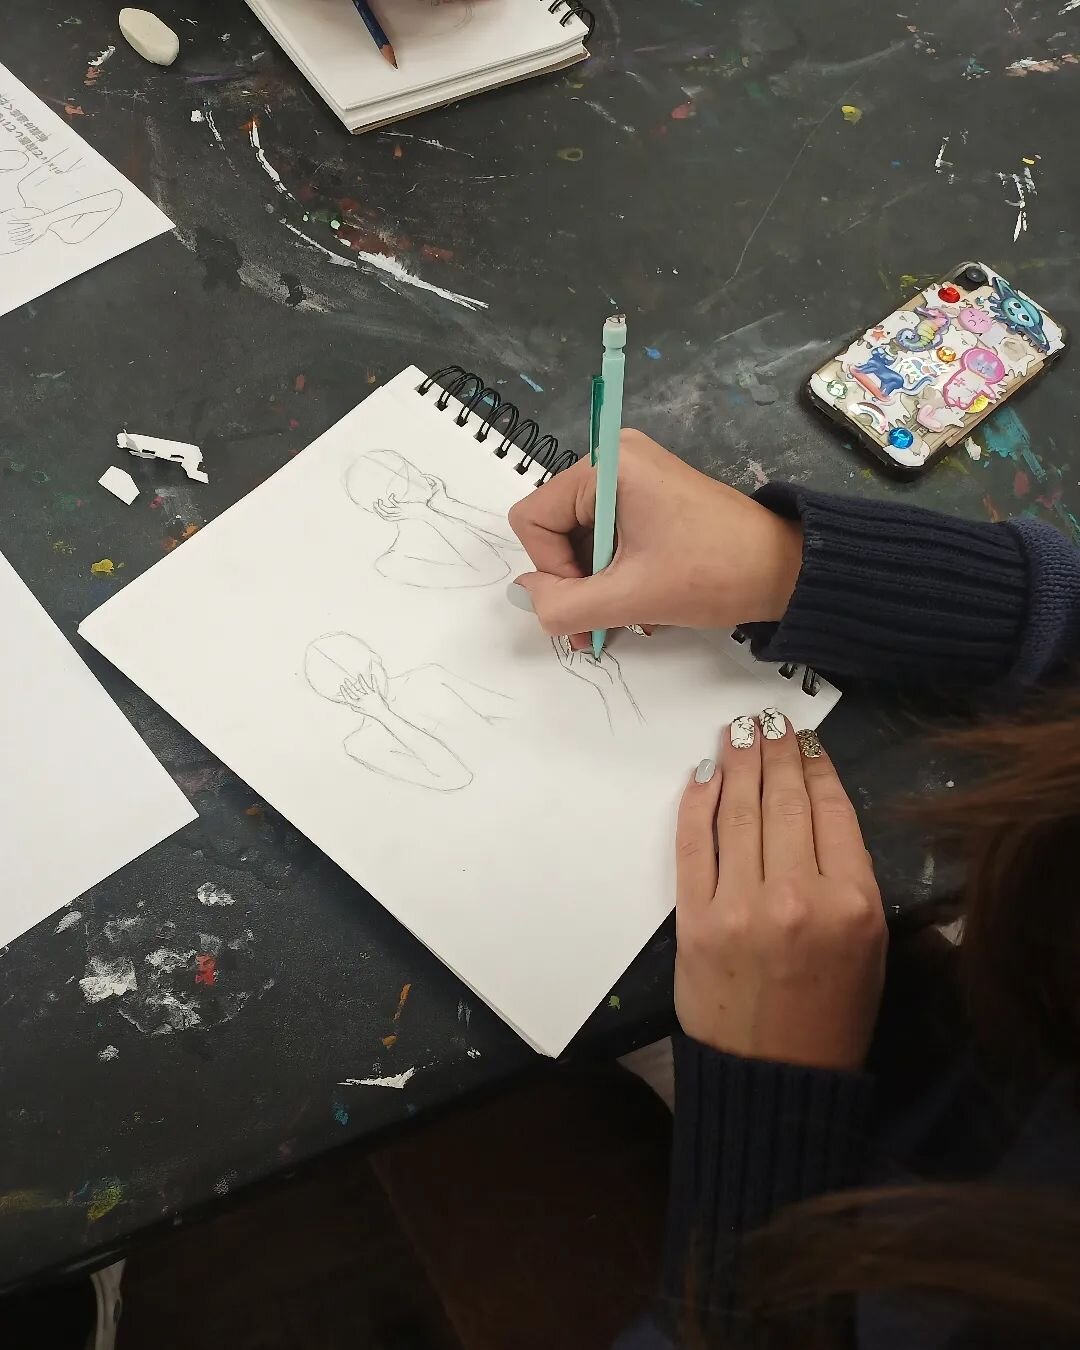 Our drawing students working on hand placements on the face and absolutely crushing it! Couldn't be more proud of these students!
.
#newcottagearts #newcottageartsdenver #drawinglessons #drawingclasses #art #artlessons #artclasses